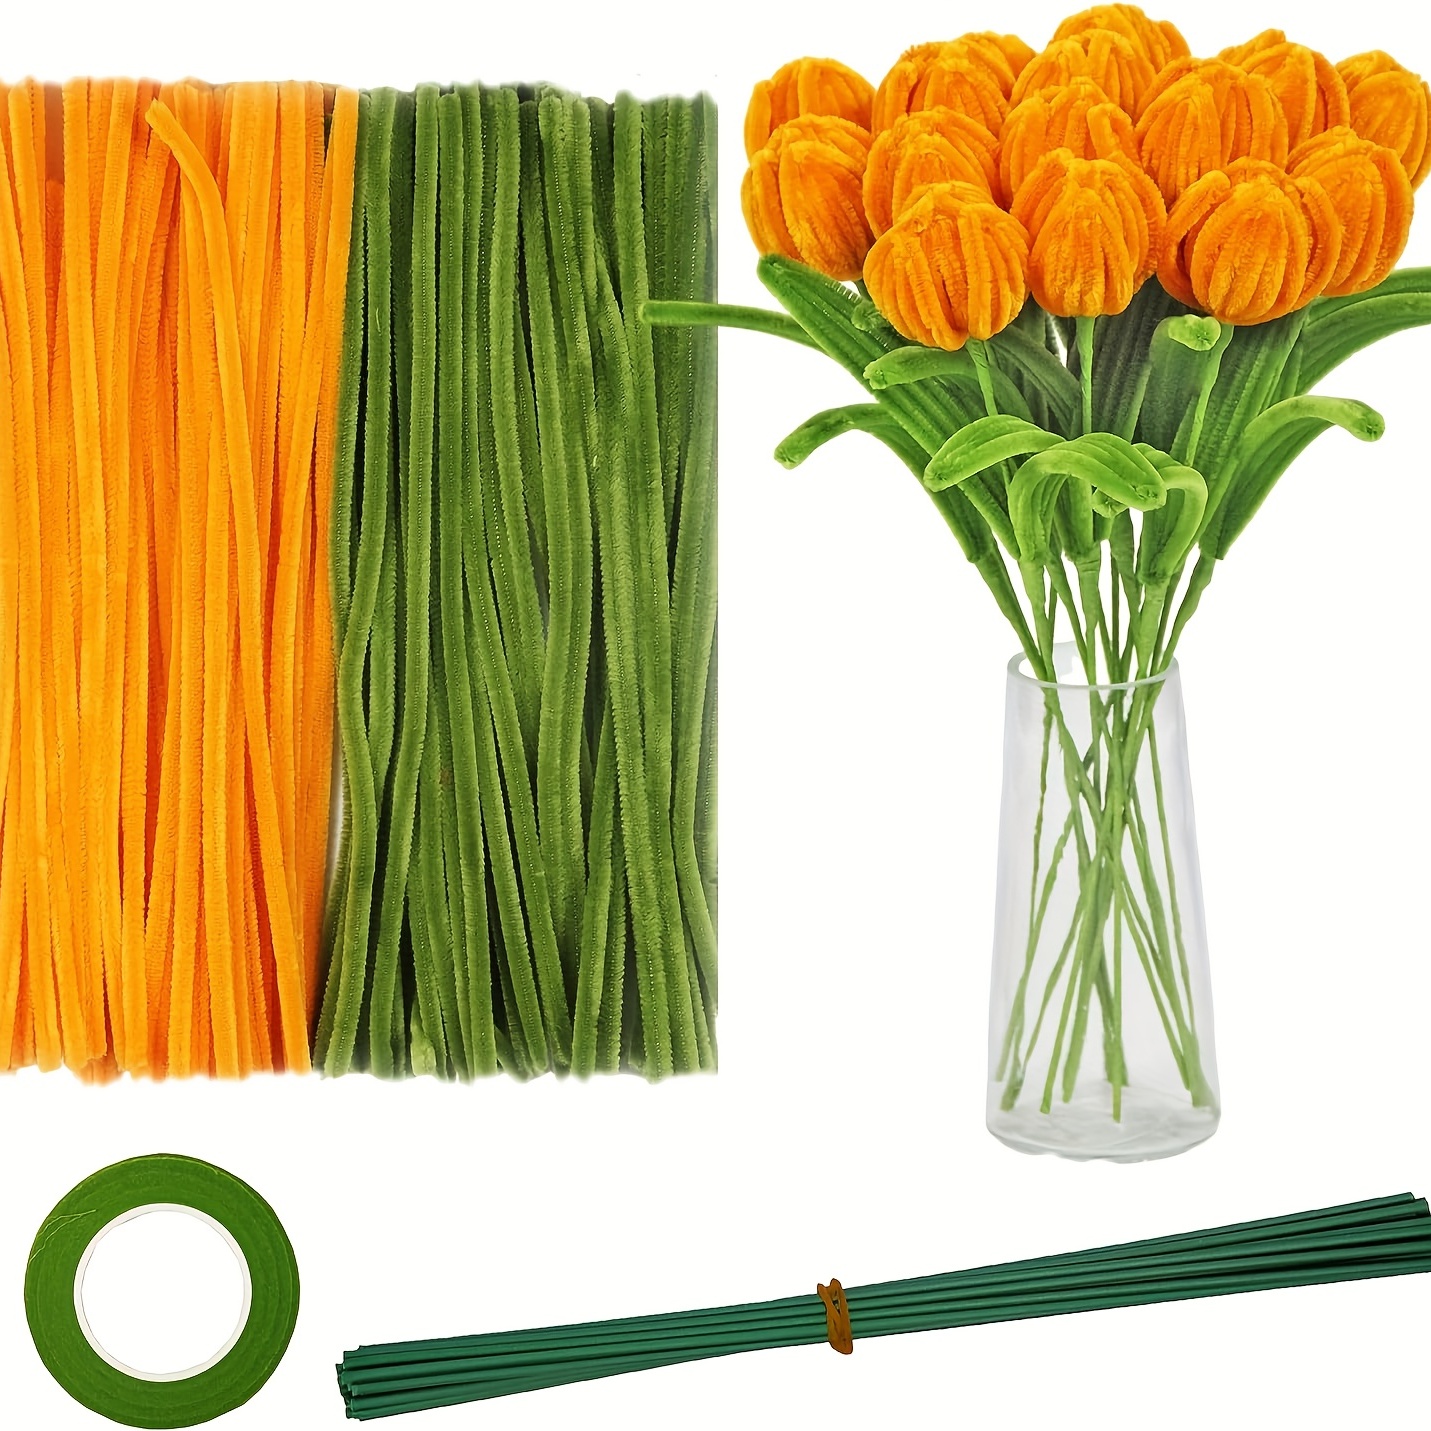 200pcs Pipe Cleaners Craft Supplies, DIY Tulip Bouquet Making Kit